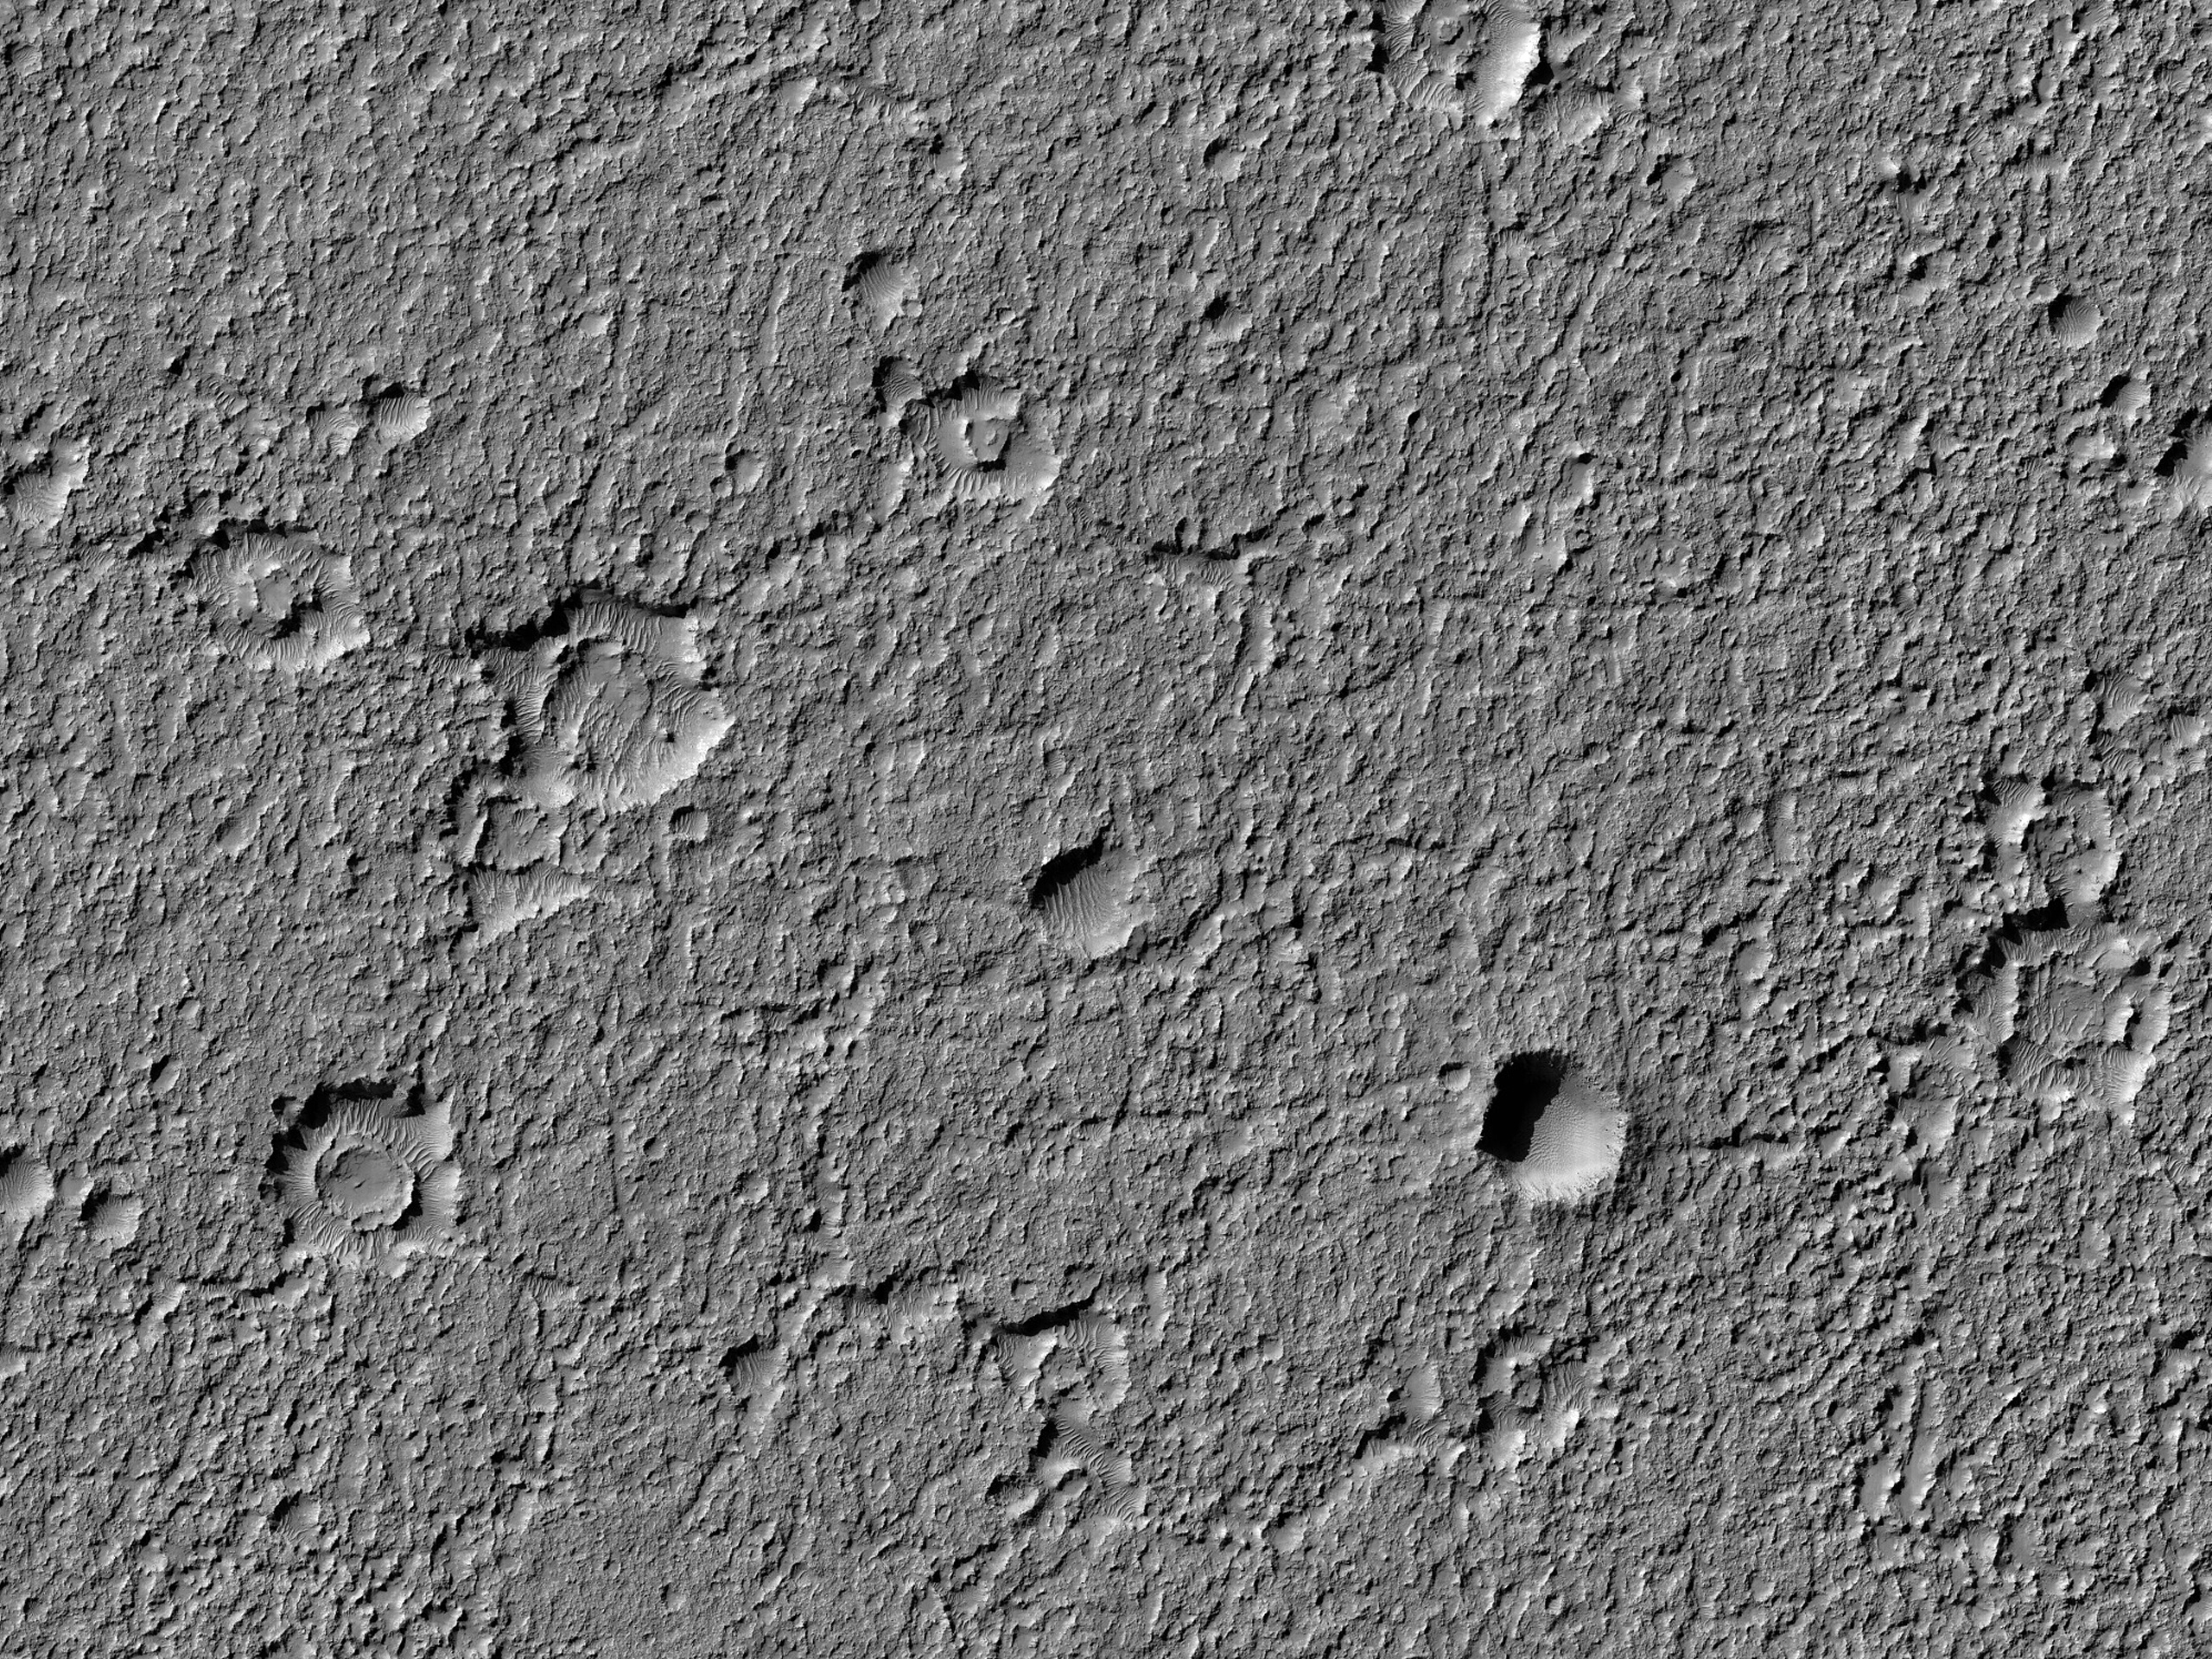 Cluster of Craters on Floor of Koval Sky Crater